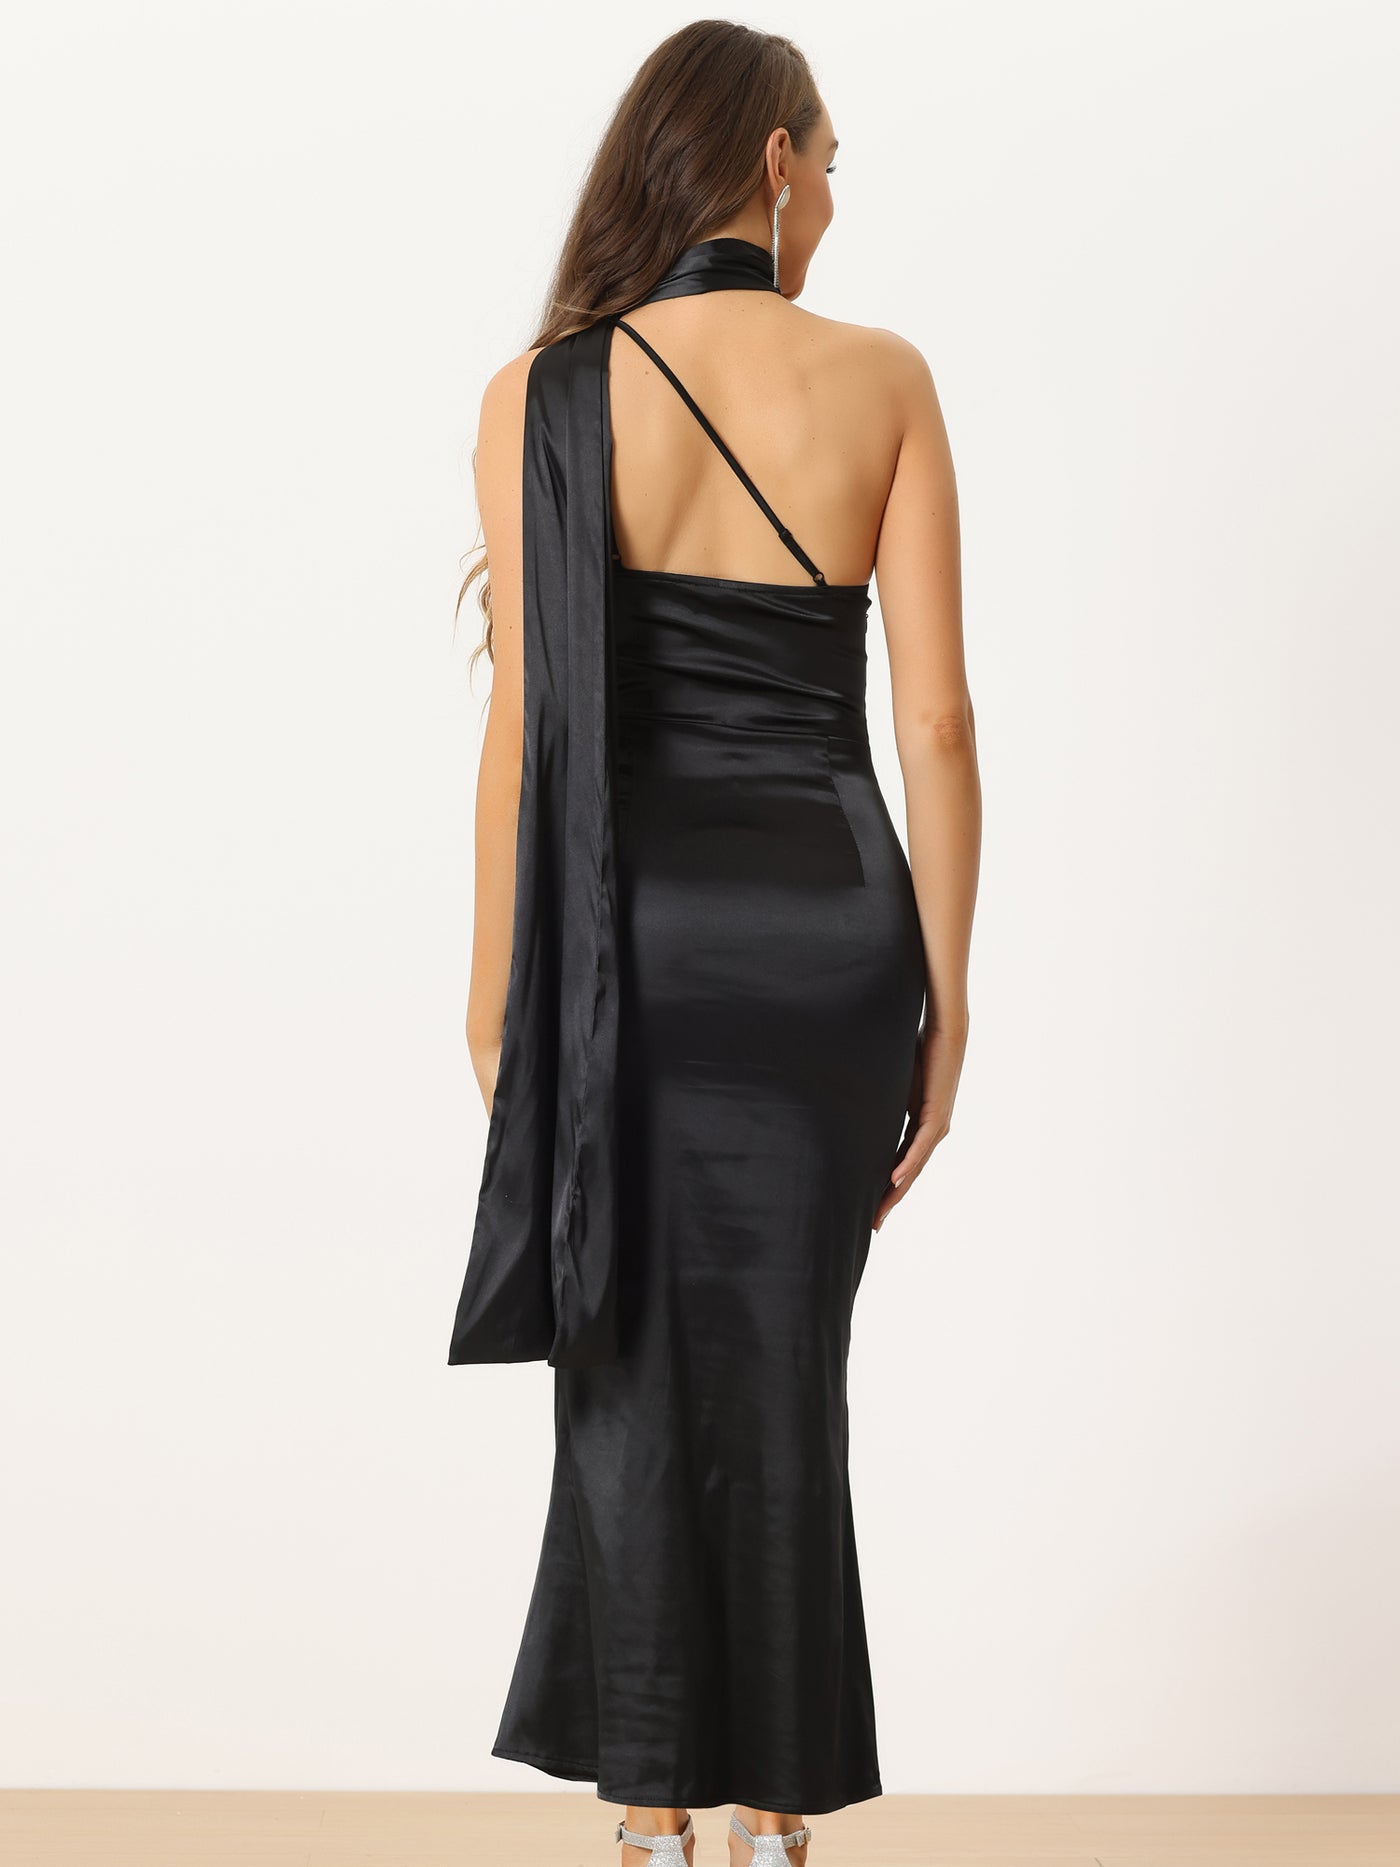 Allegra K Satin One Shoulder Backless Bridesmaid Cocktail Party Maxi Dress